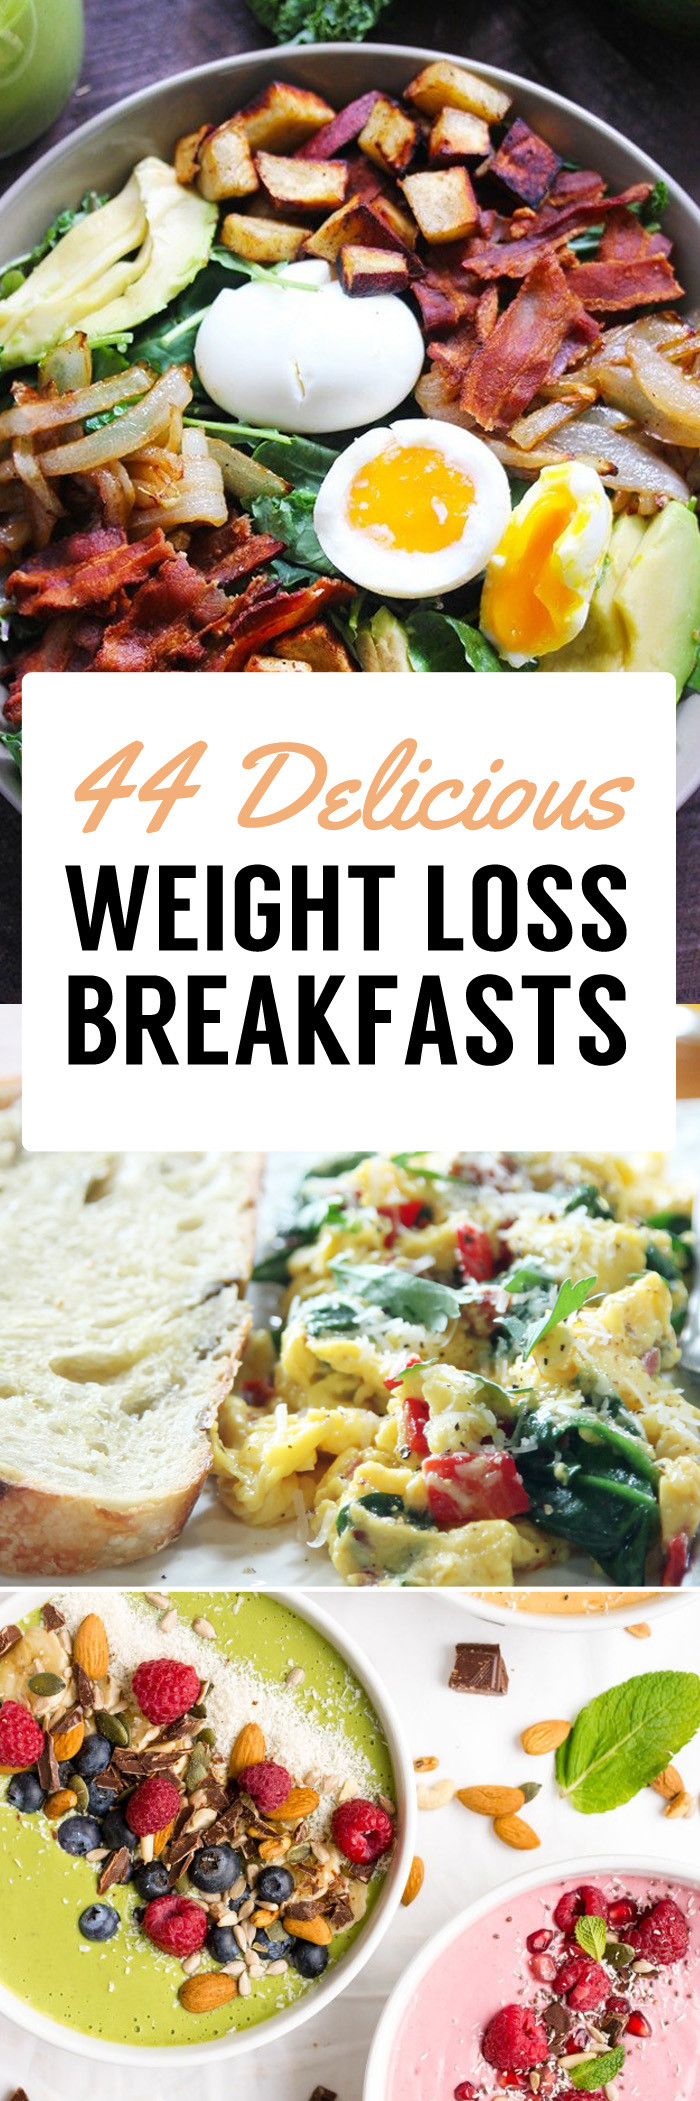 Healthy Recipes For Breakfast
 44 Weight Loss Breakfast Recipes To Jumpstart Your Fat